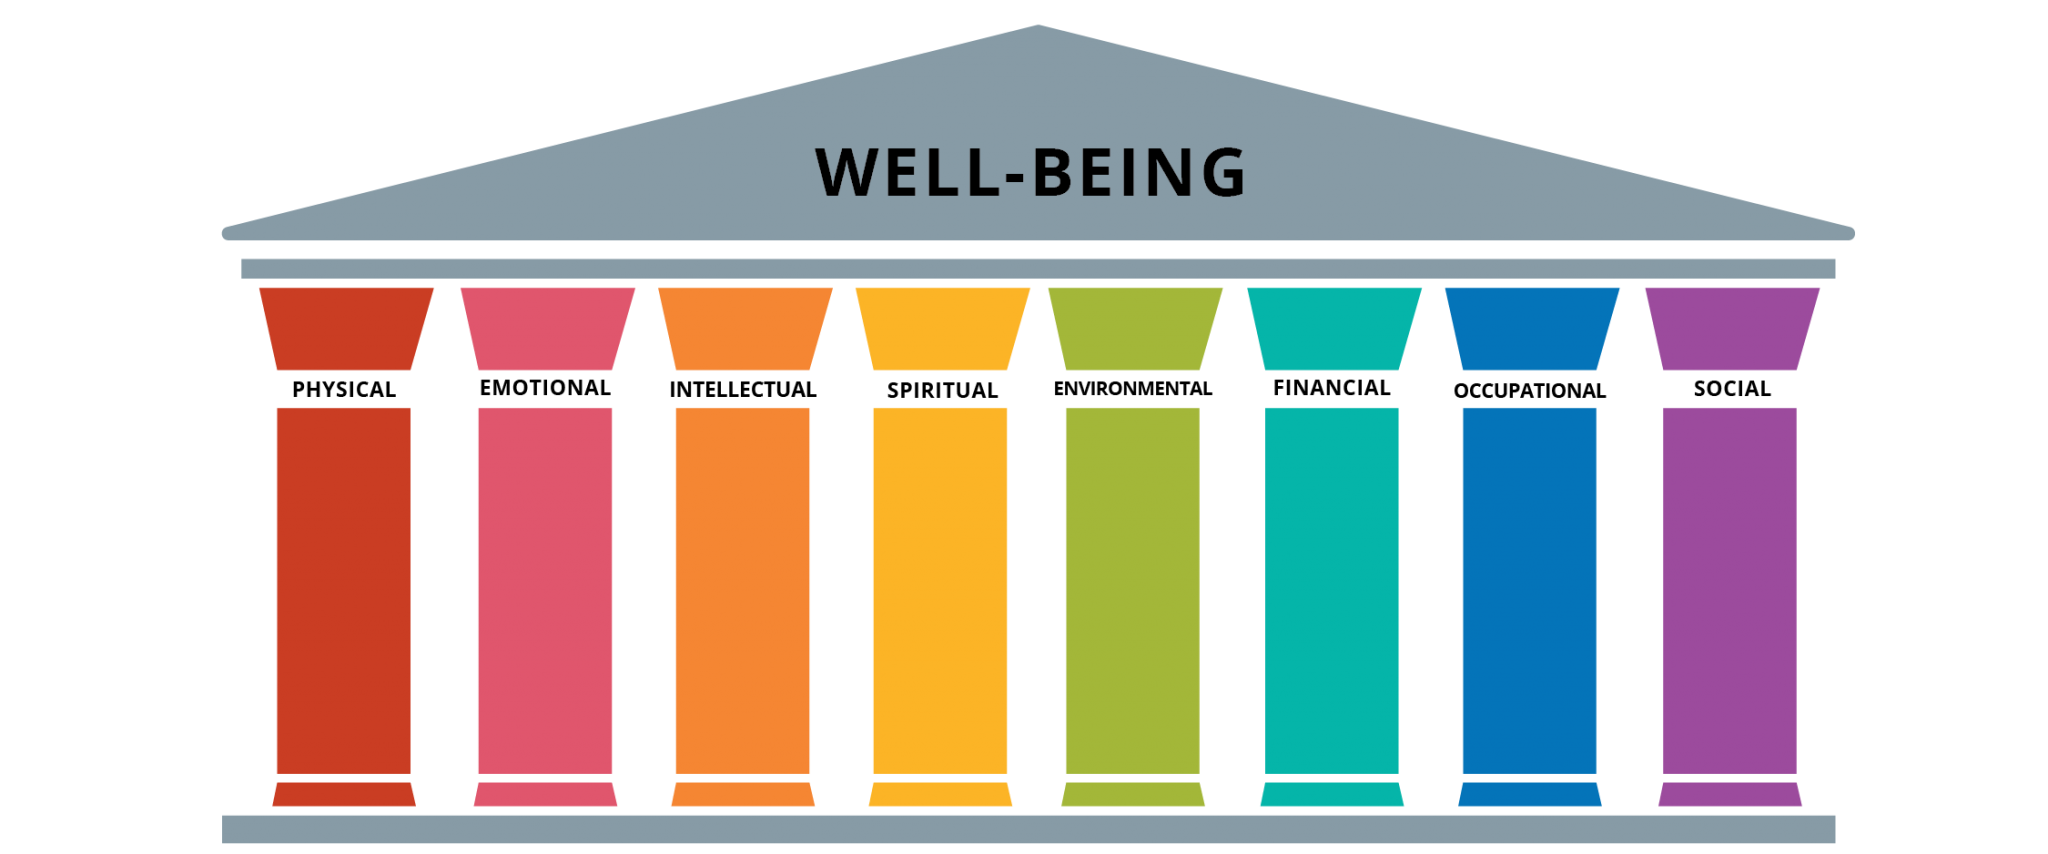 Pillars of Well-Being graphic: Physical, Emotional, Intellectual, Spiritual, Environmental, Financial, Occupational, Social